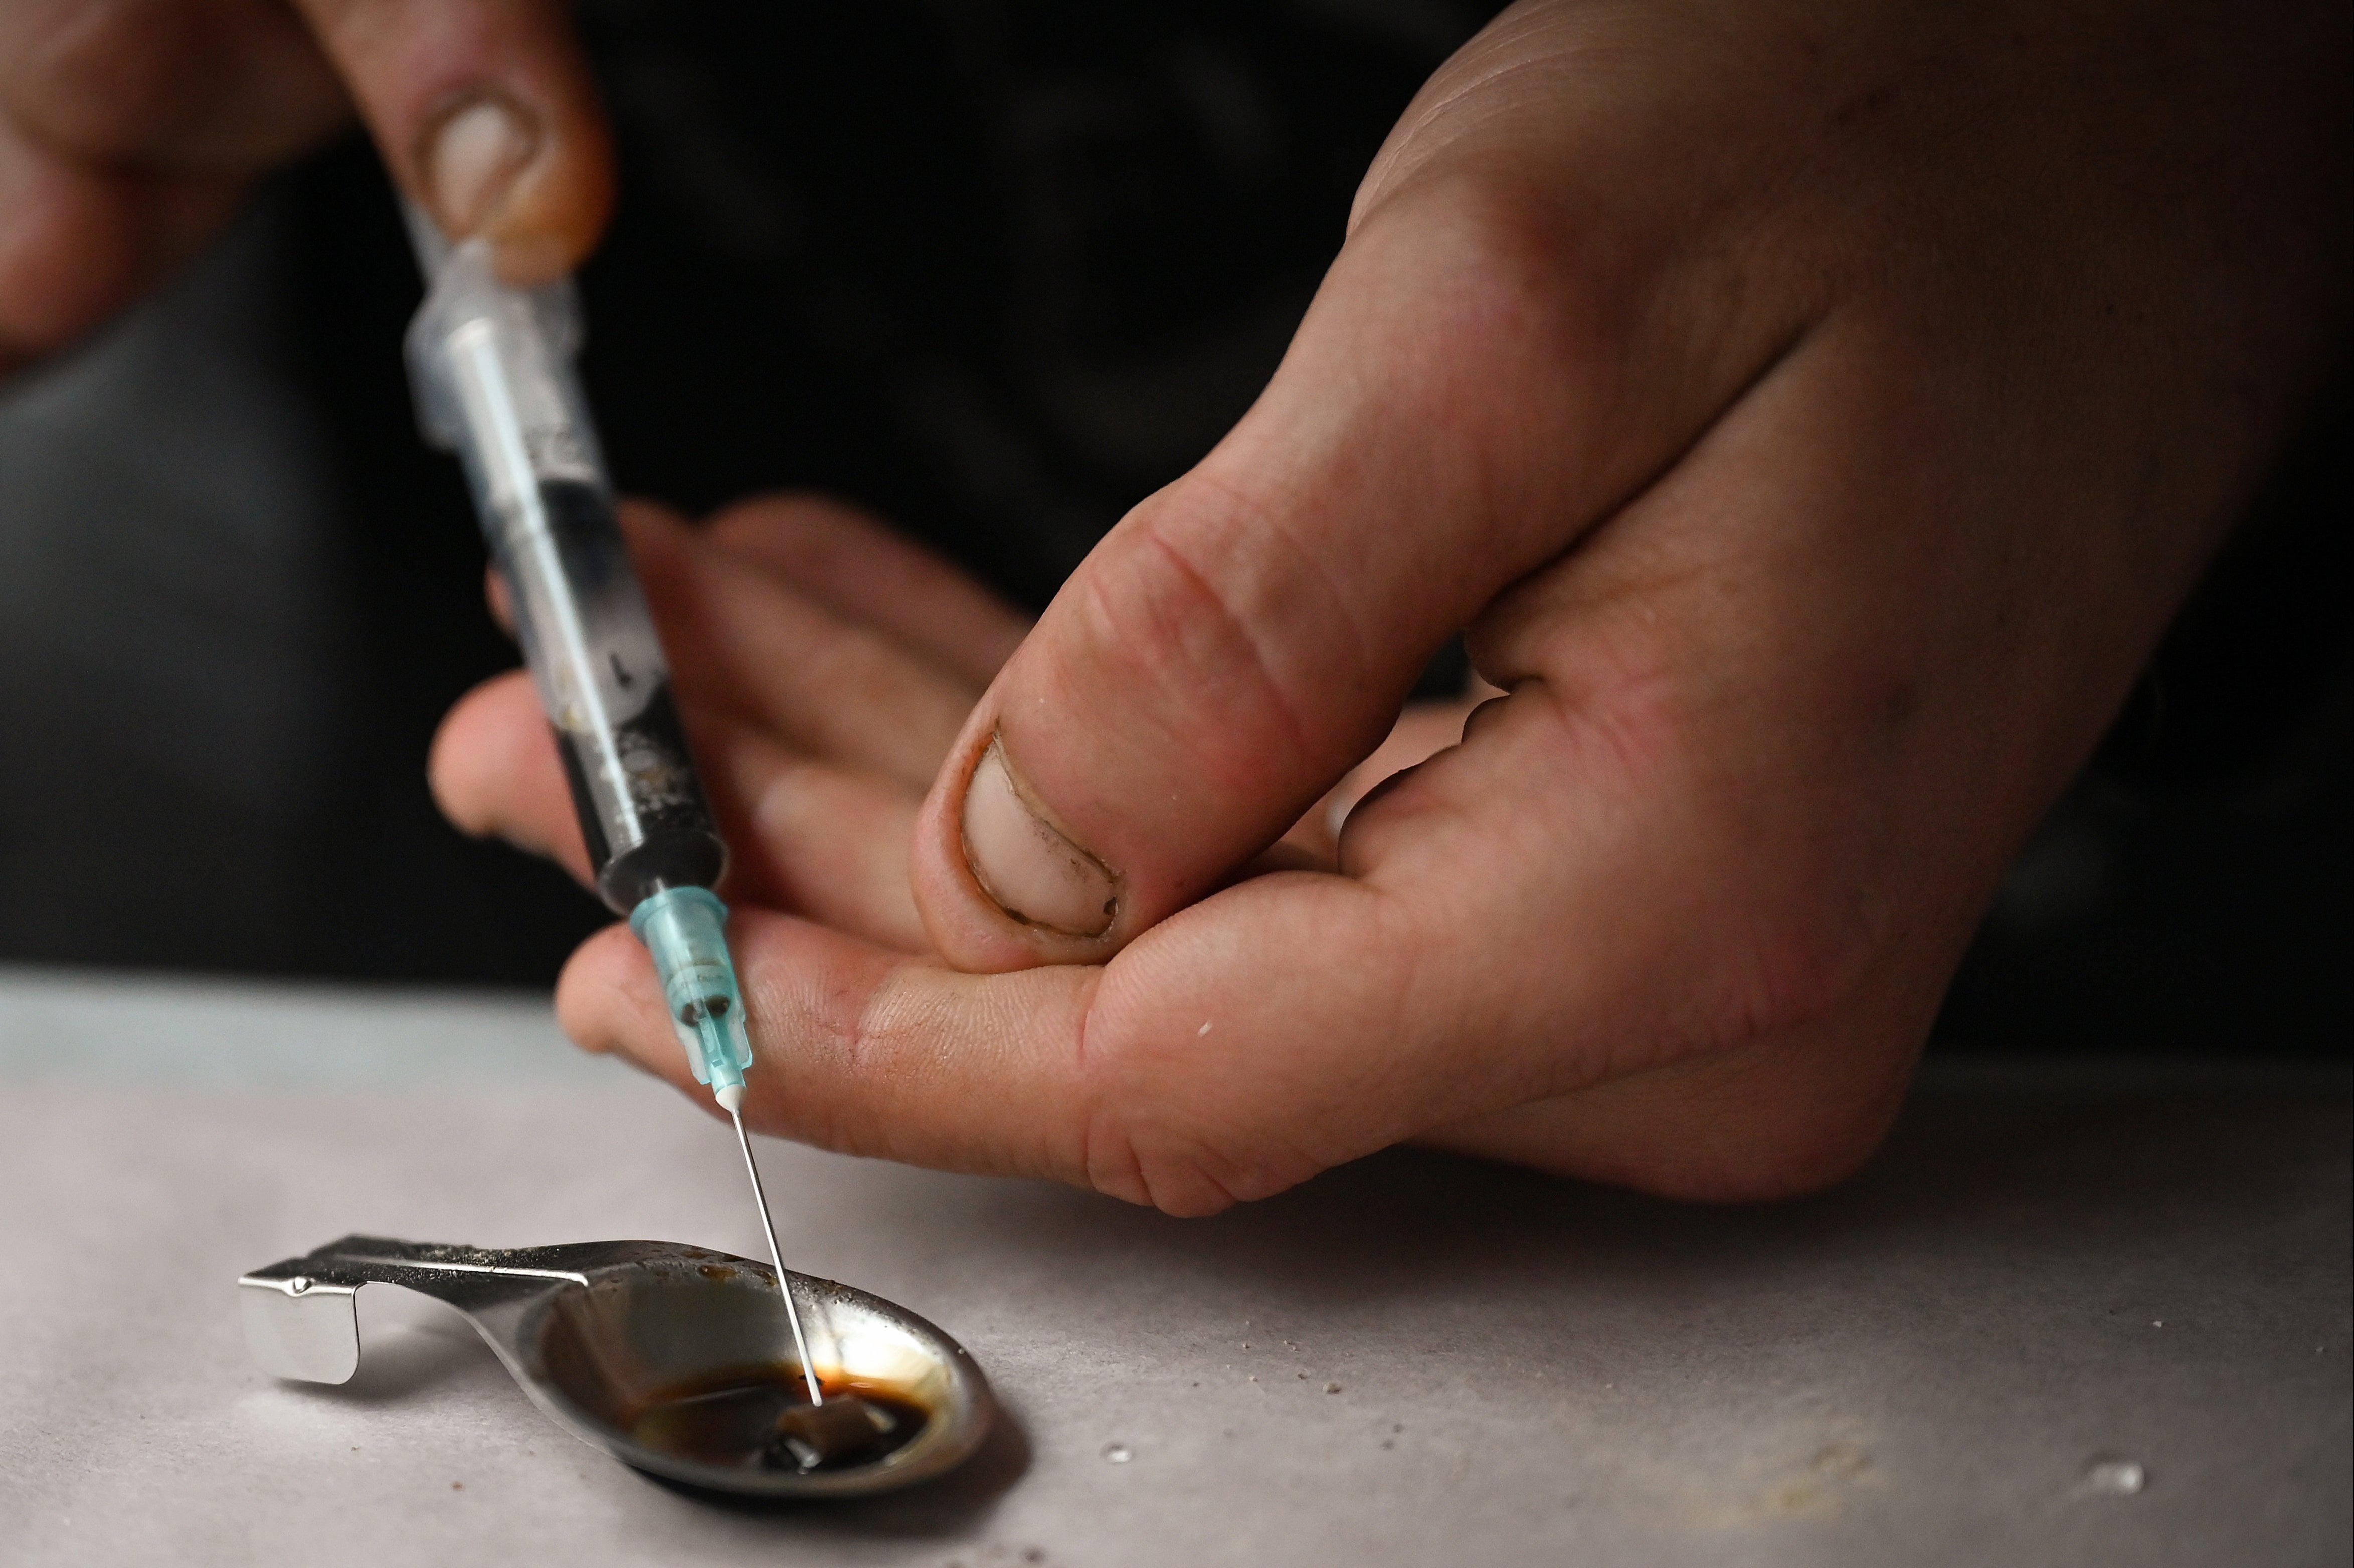 Drug users prepare heroin before injecting at a safe injection facility set up by activist Peter Krykant in Glasgow in 2020